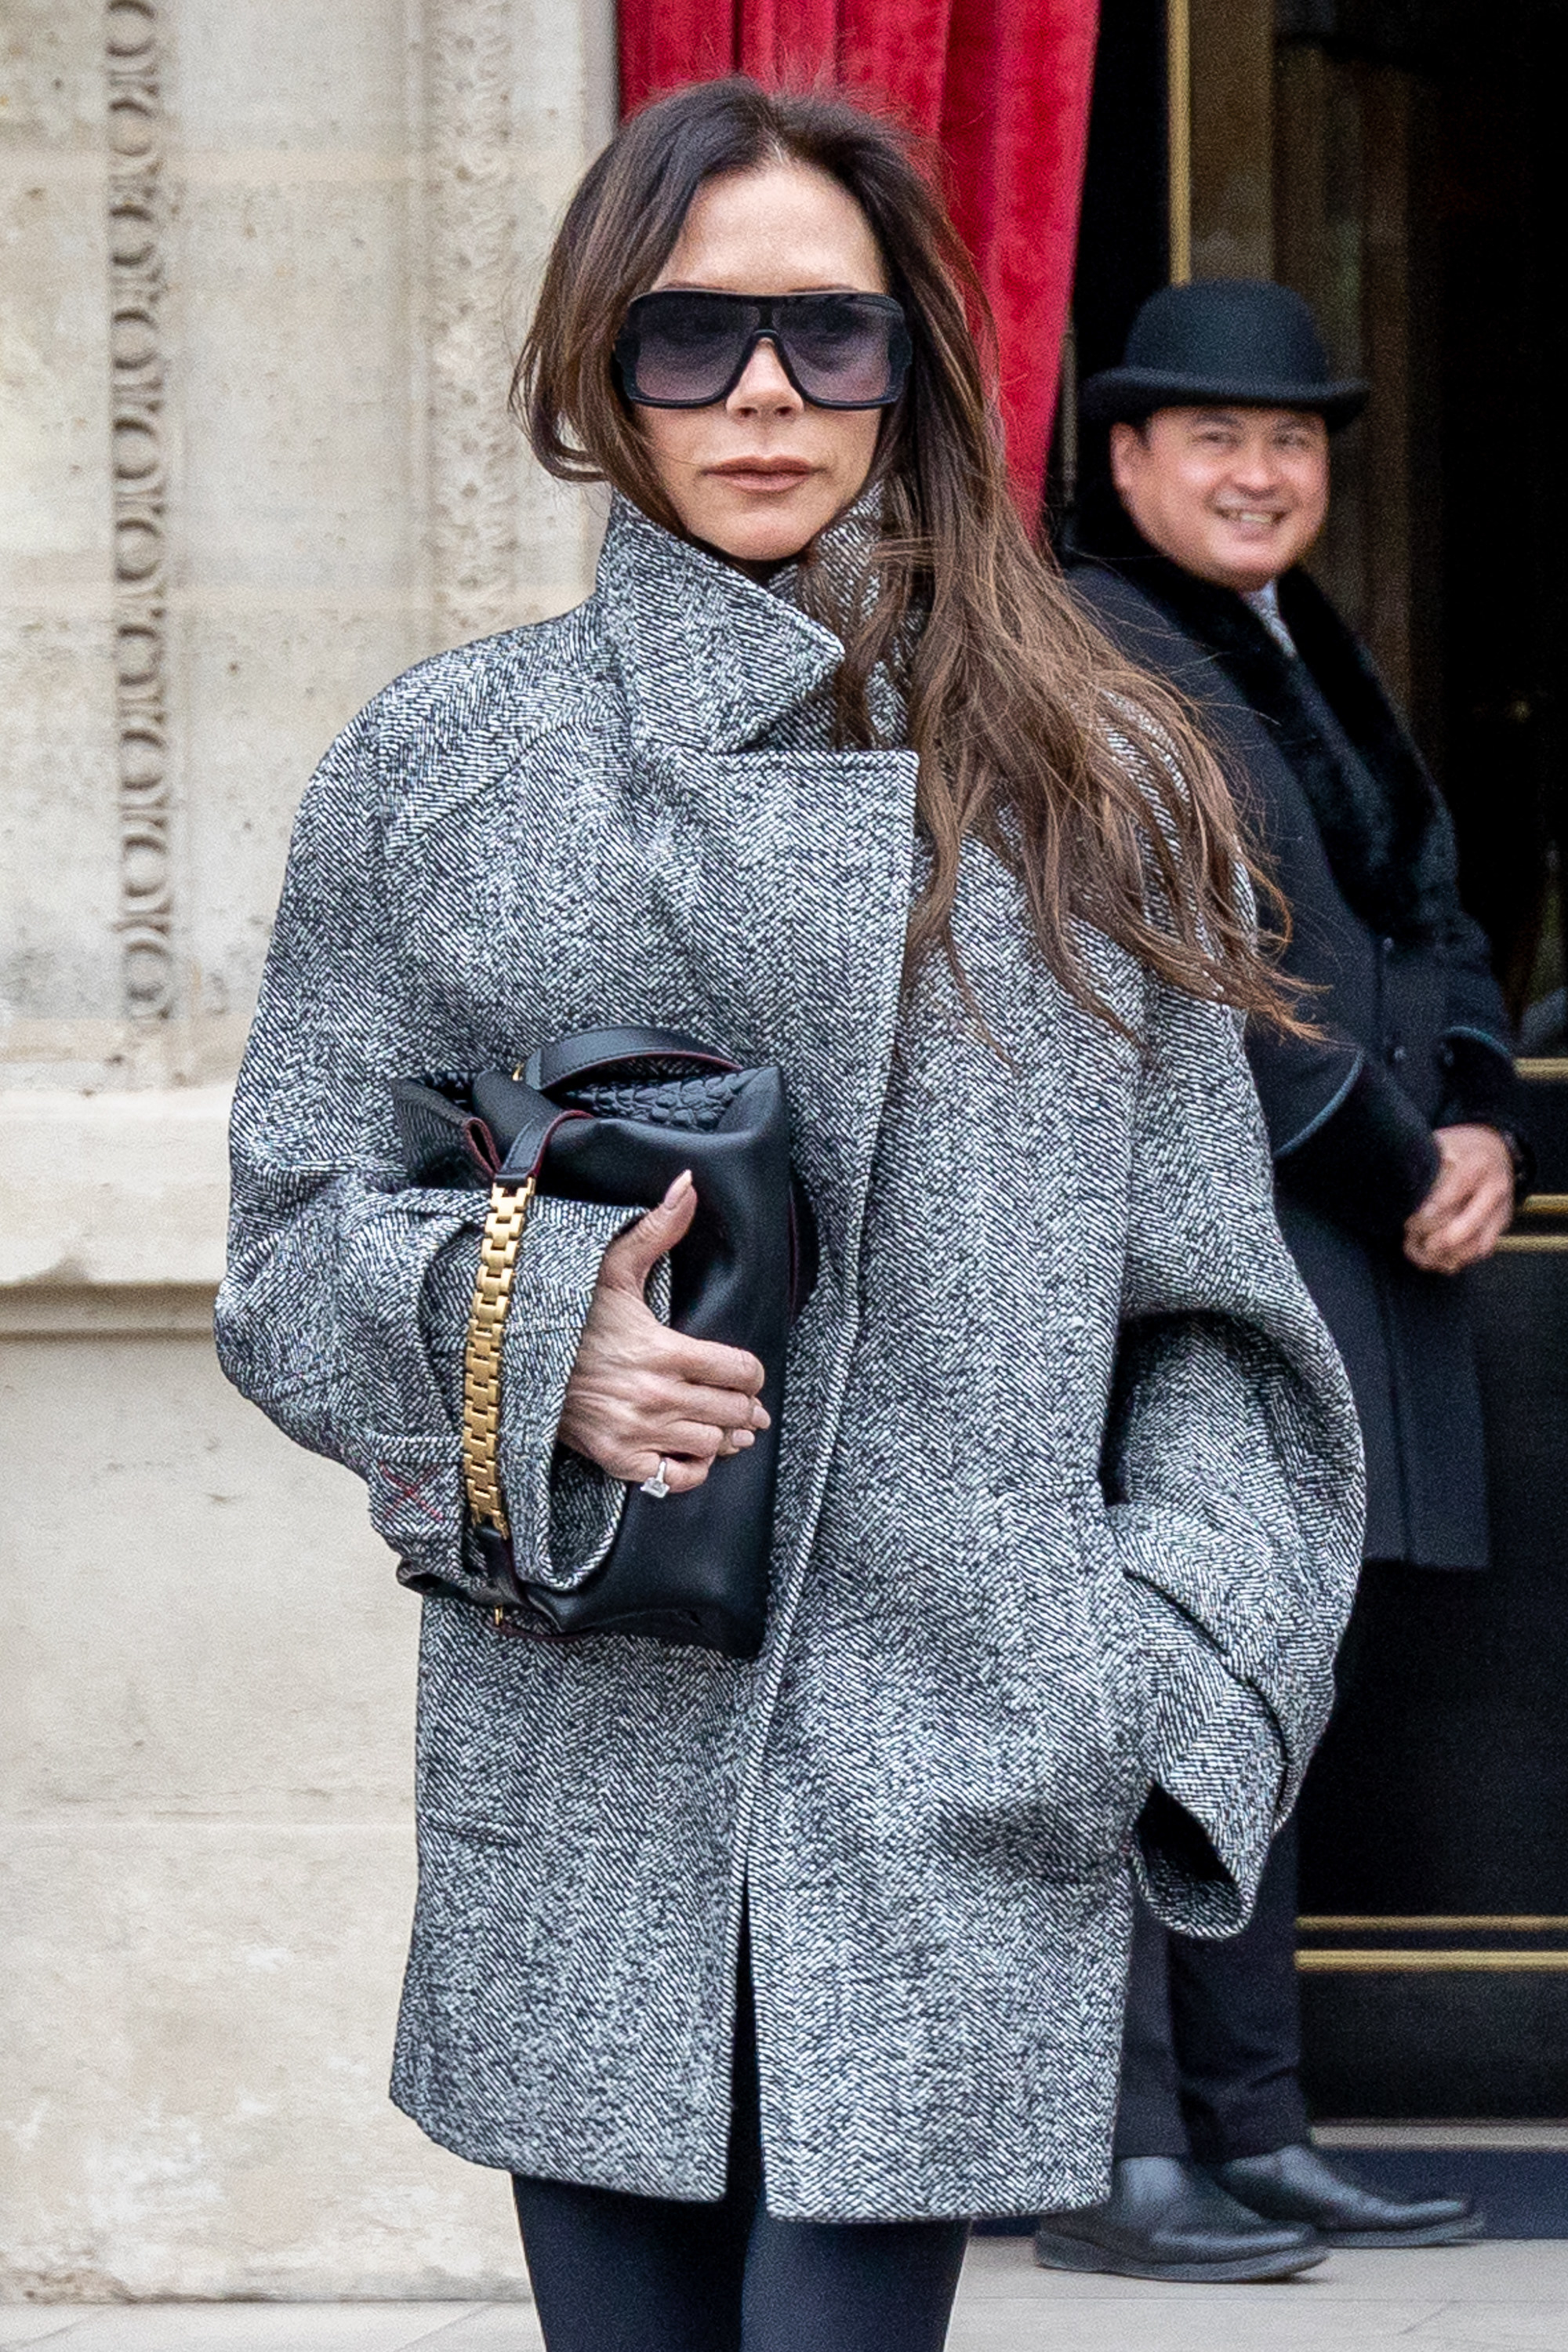 Victoria Beckham, wearing a big grey coat and oversized sunglasses, walking out of a building